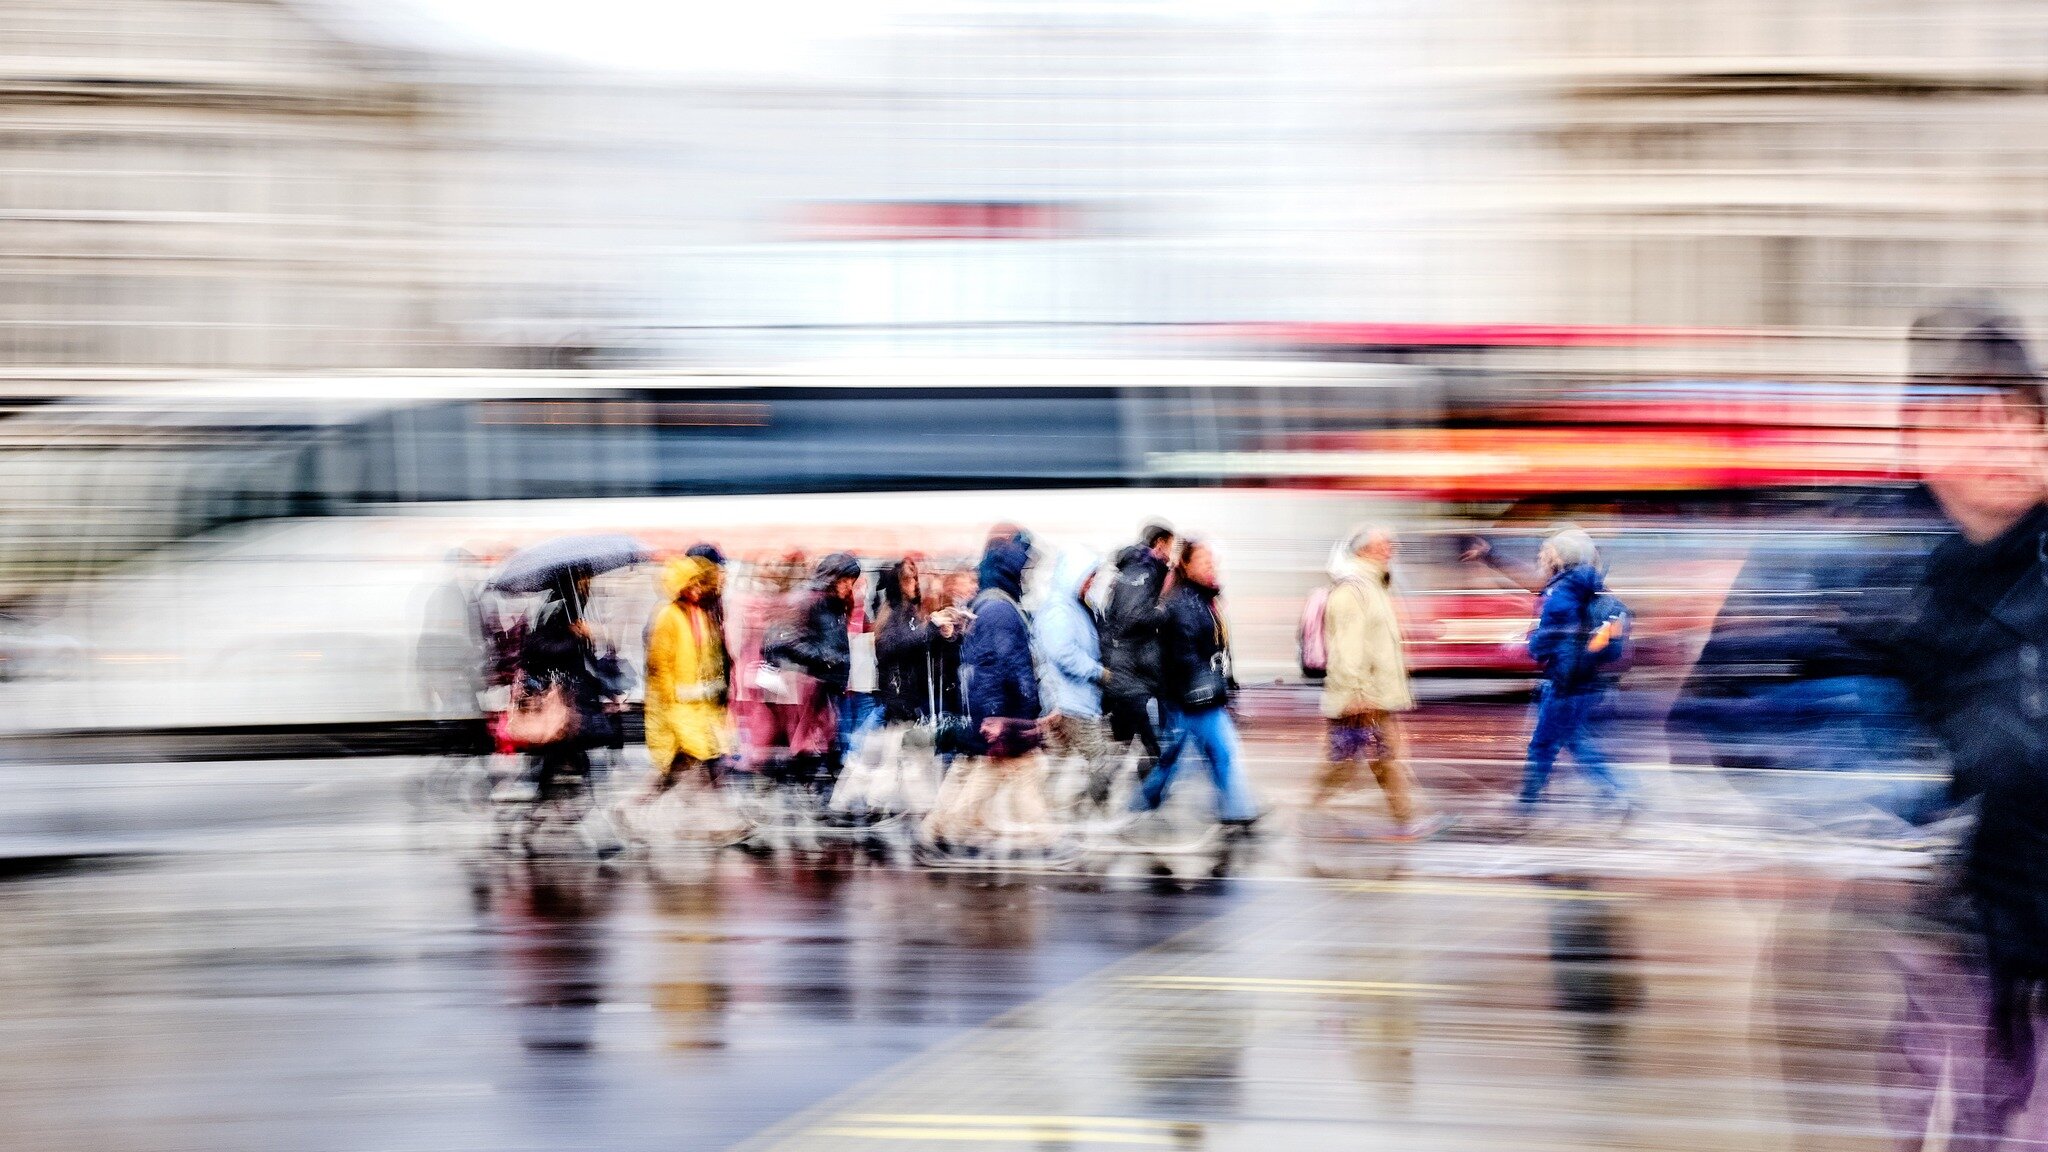 Crossing - Crossing the road at Trafalgar Square in the rain. I stood there waiting for every time the crossing went green and people could cross. I loved how everyone seemed to be huddled together in this one with just one person was going the other